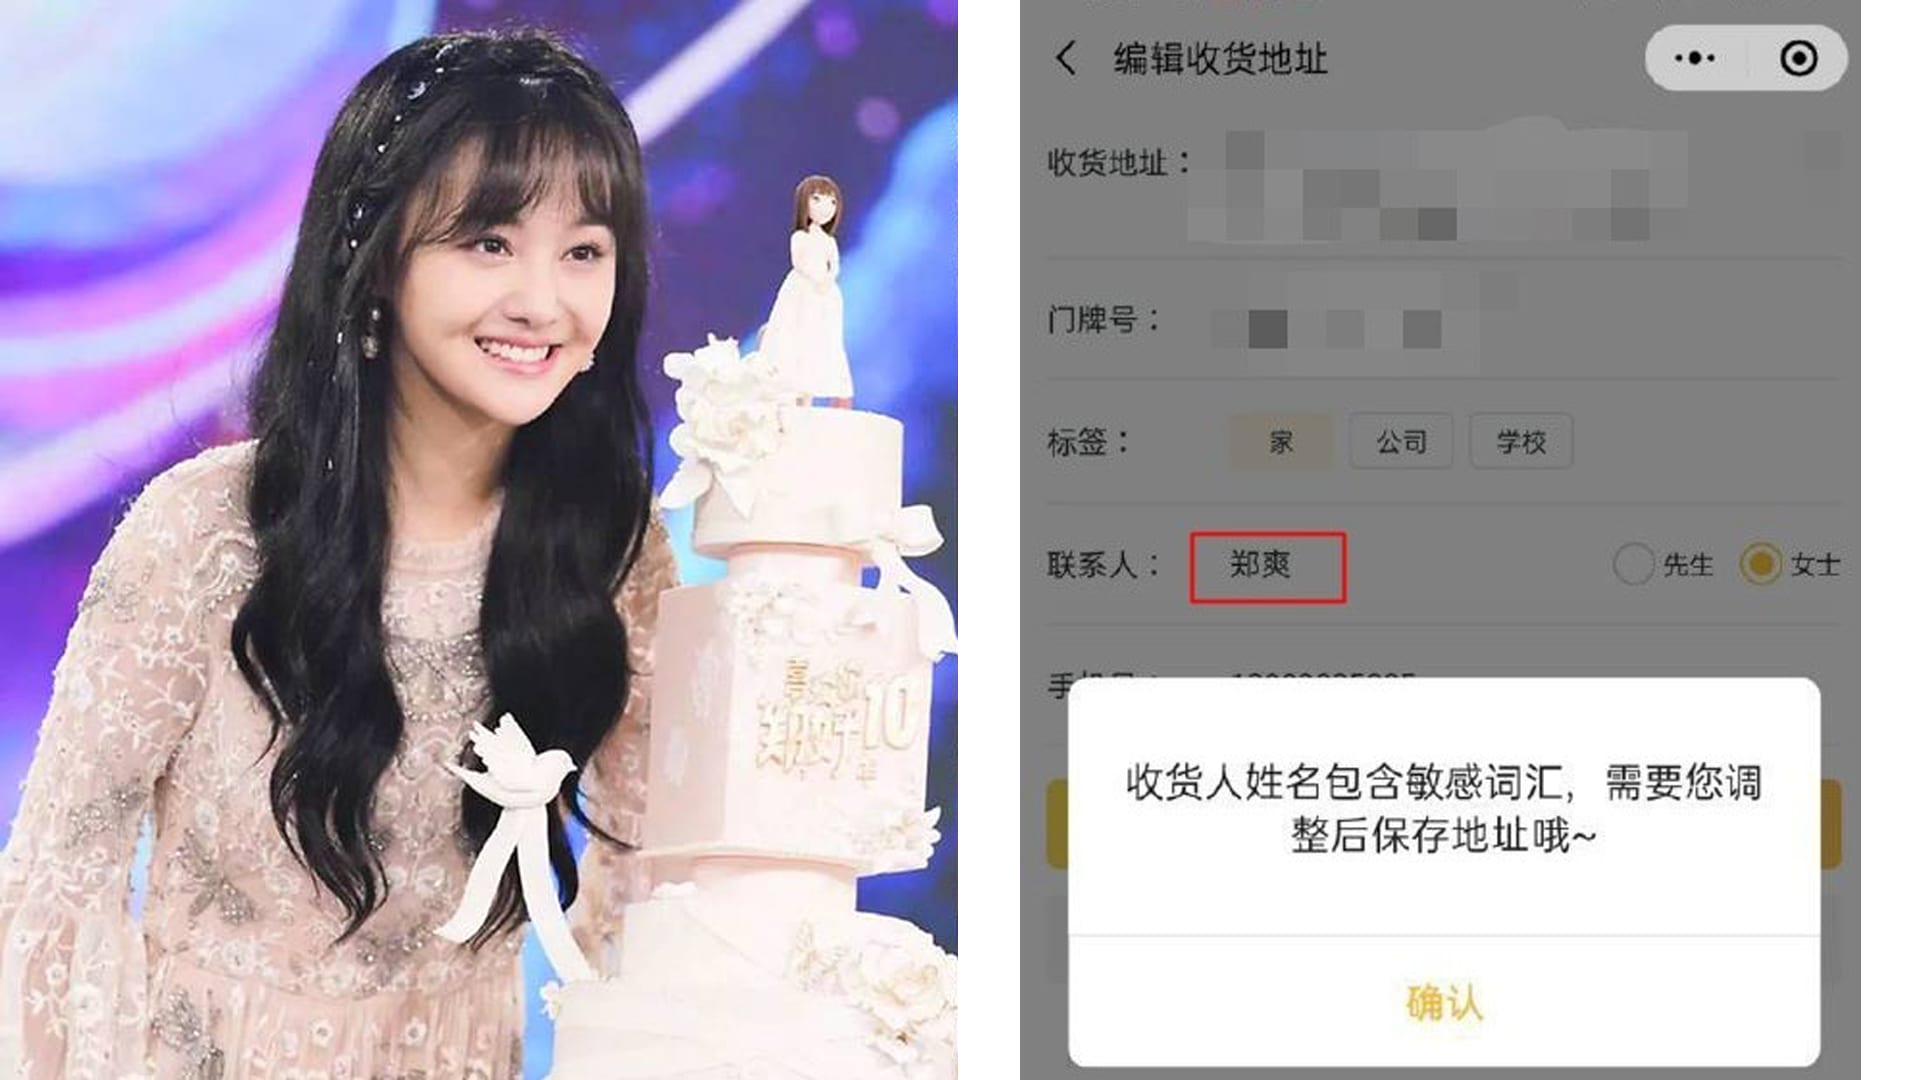 Chinese Star Zheng Shuang Allegedly Banned By Food Delivery App After Surrogacy Scandal